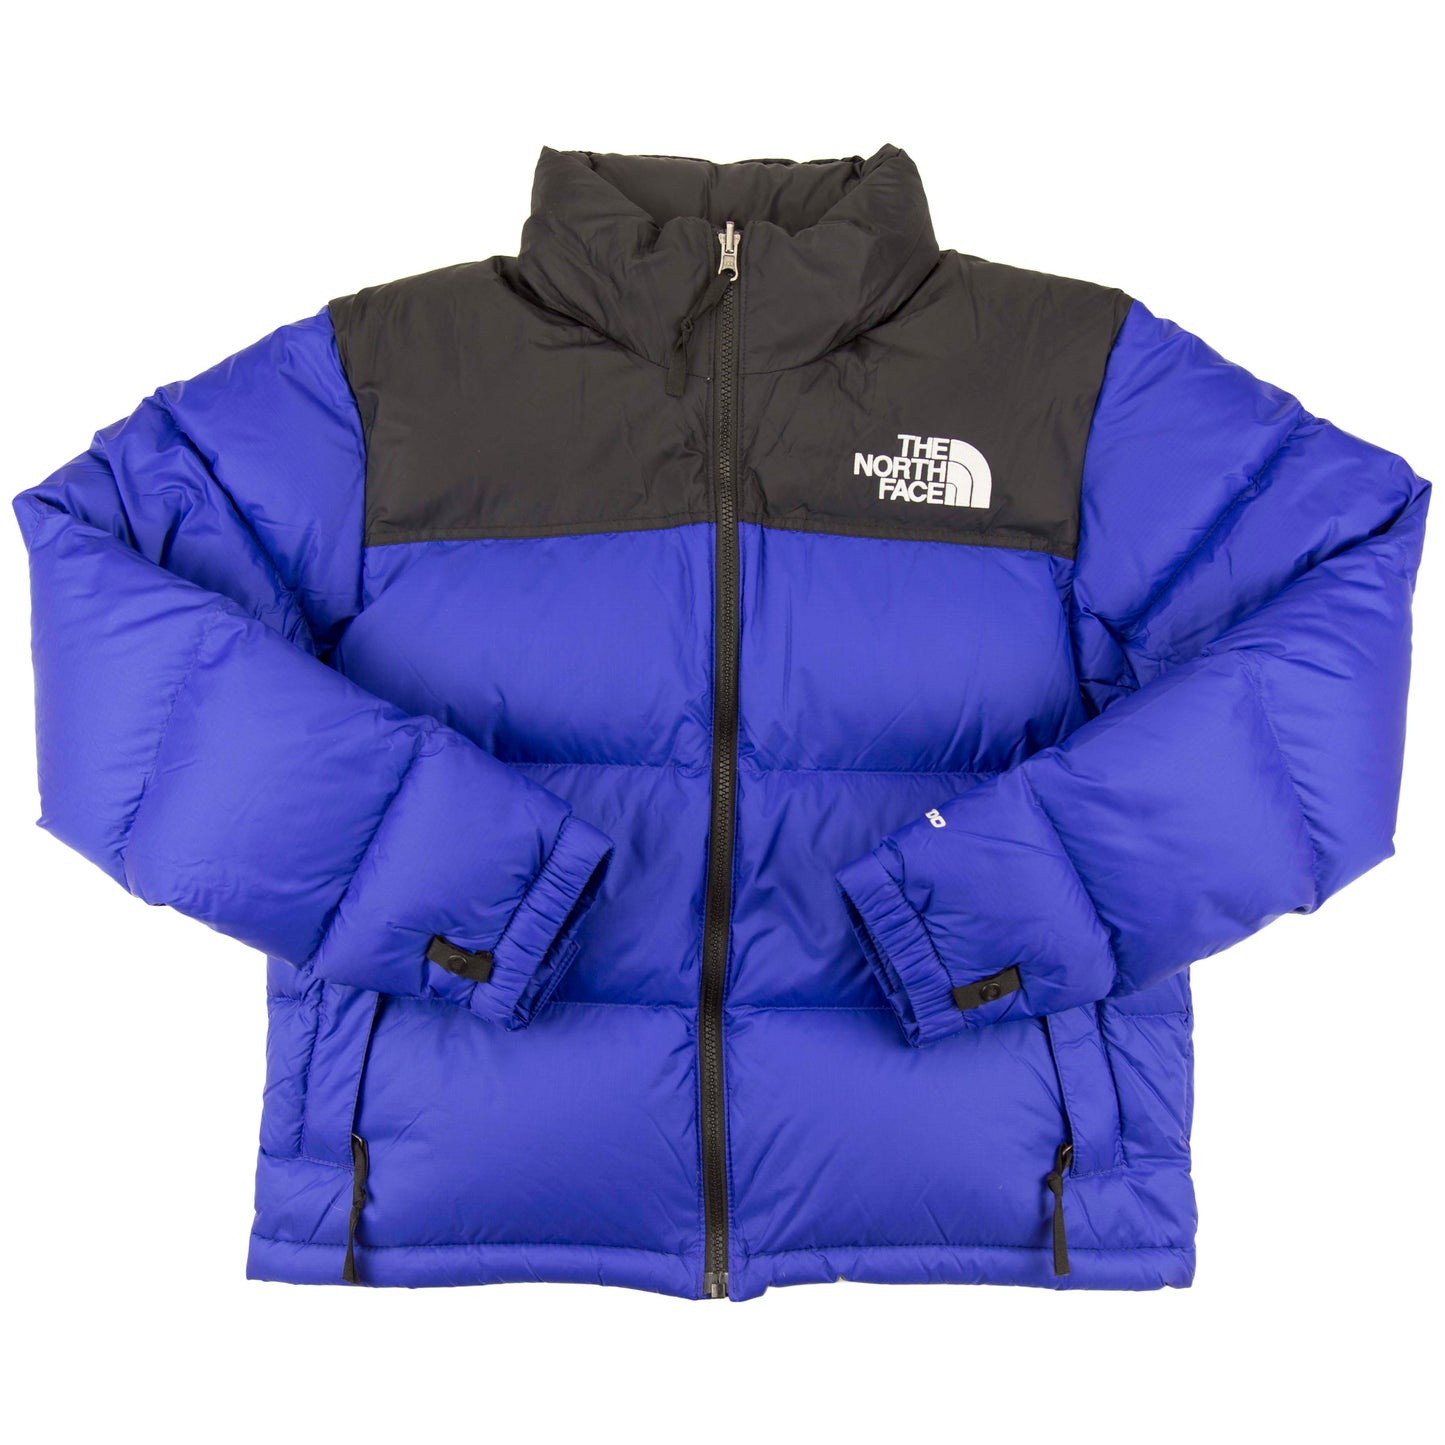 The North Face - M